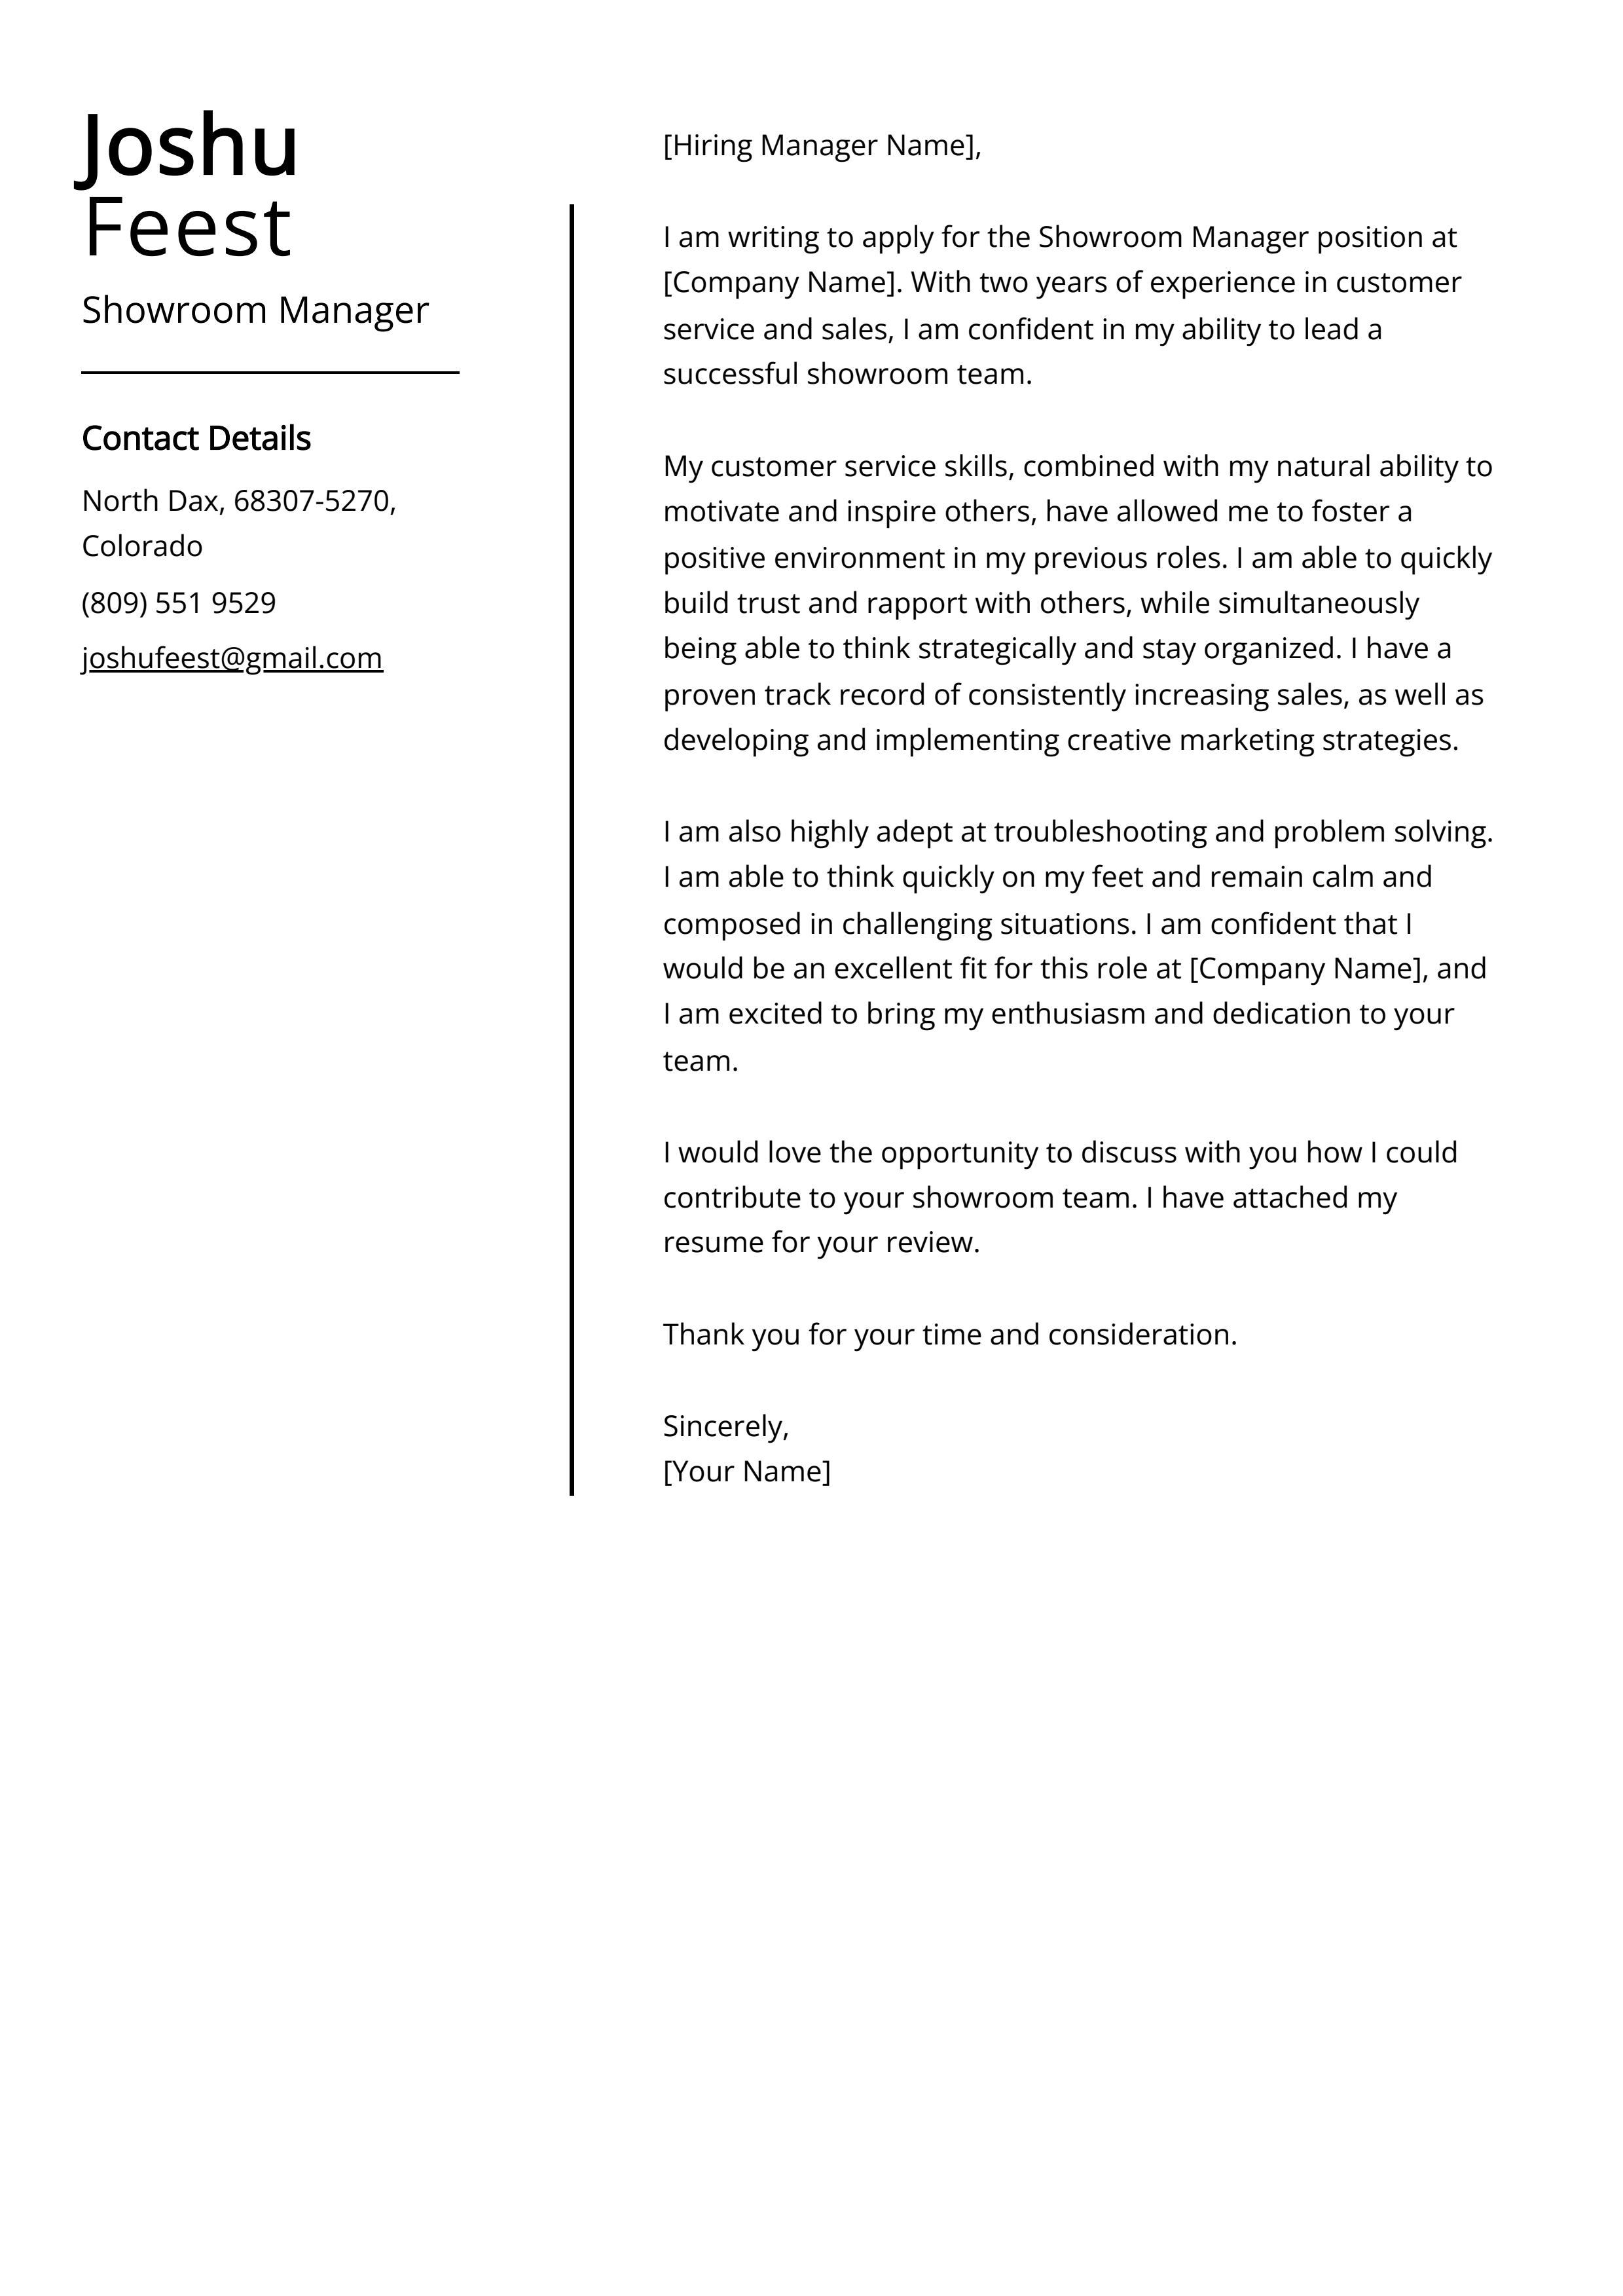 Showroom Manager Cover Letter Example